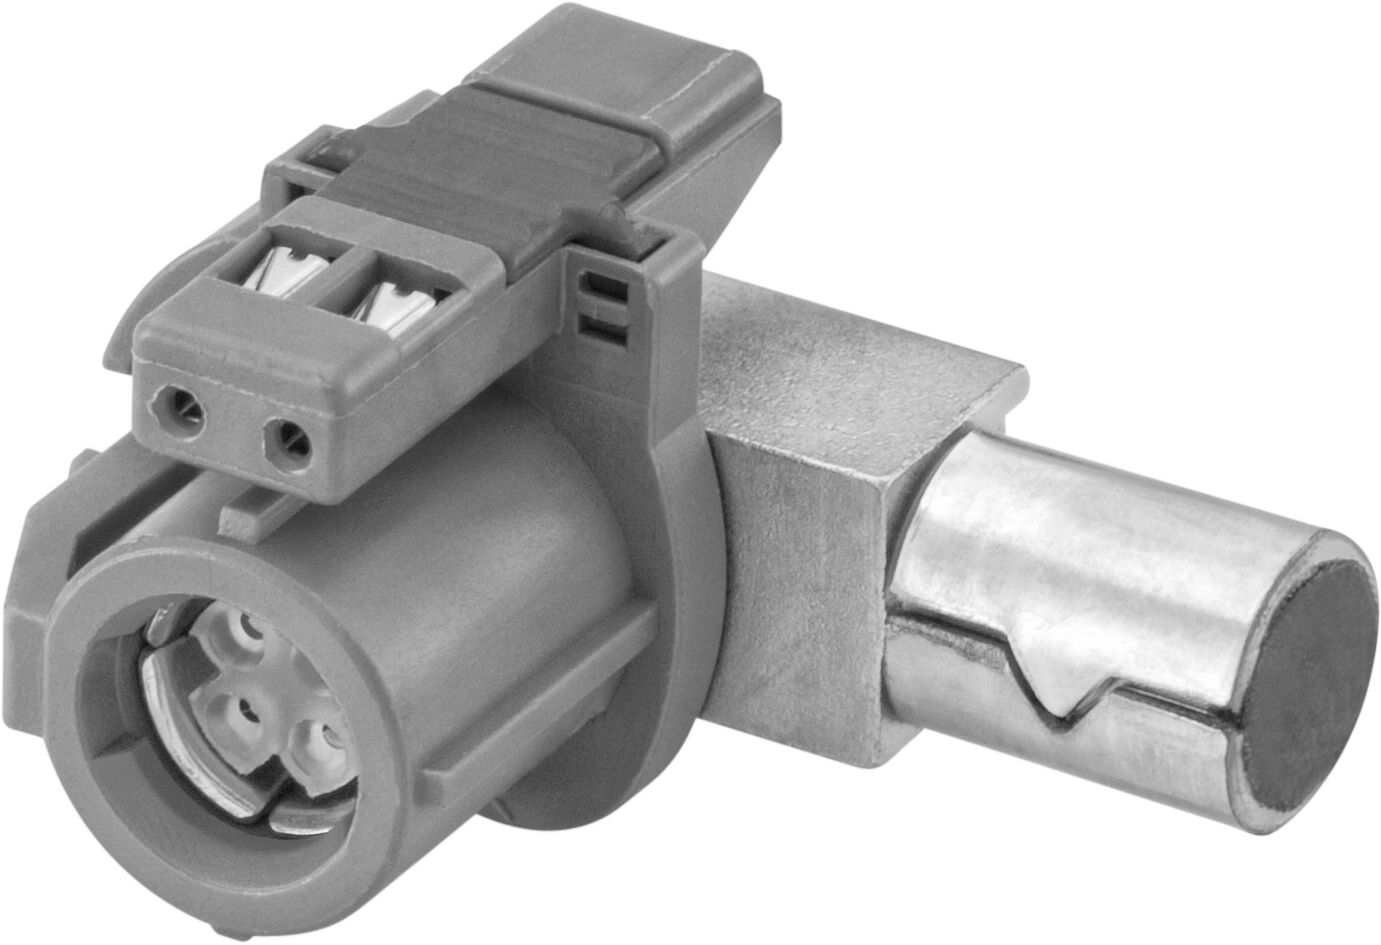 Ammco Style Right Angle Drive (909815)